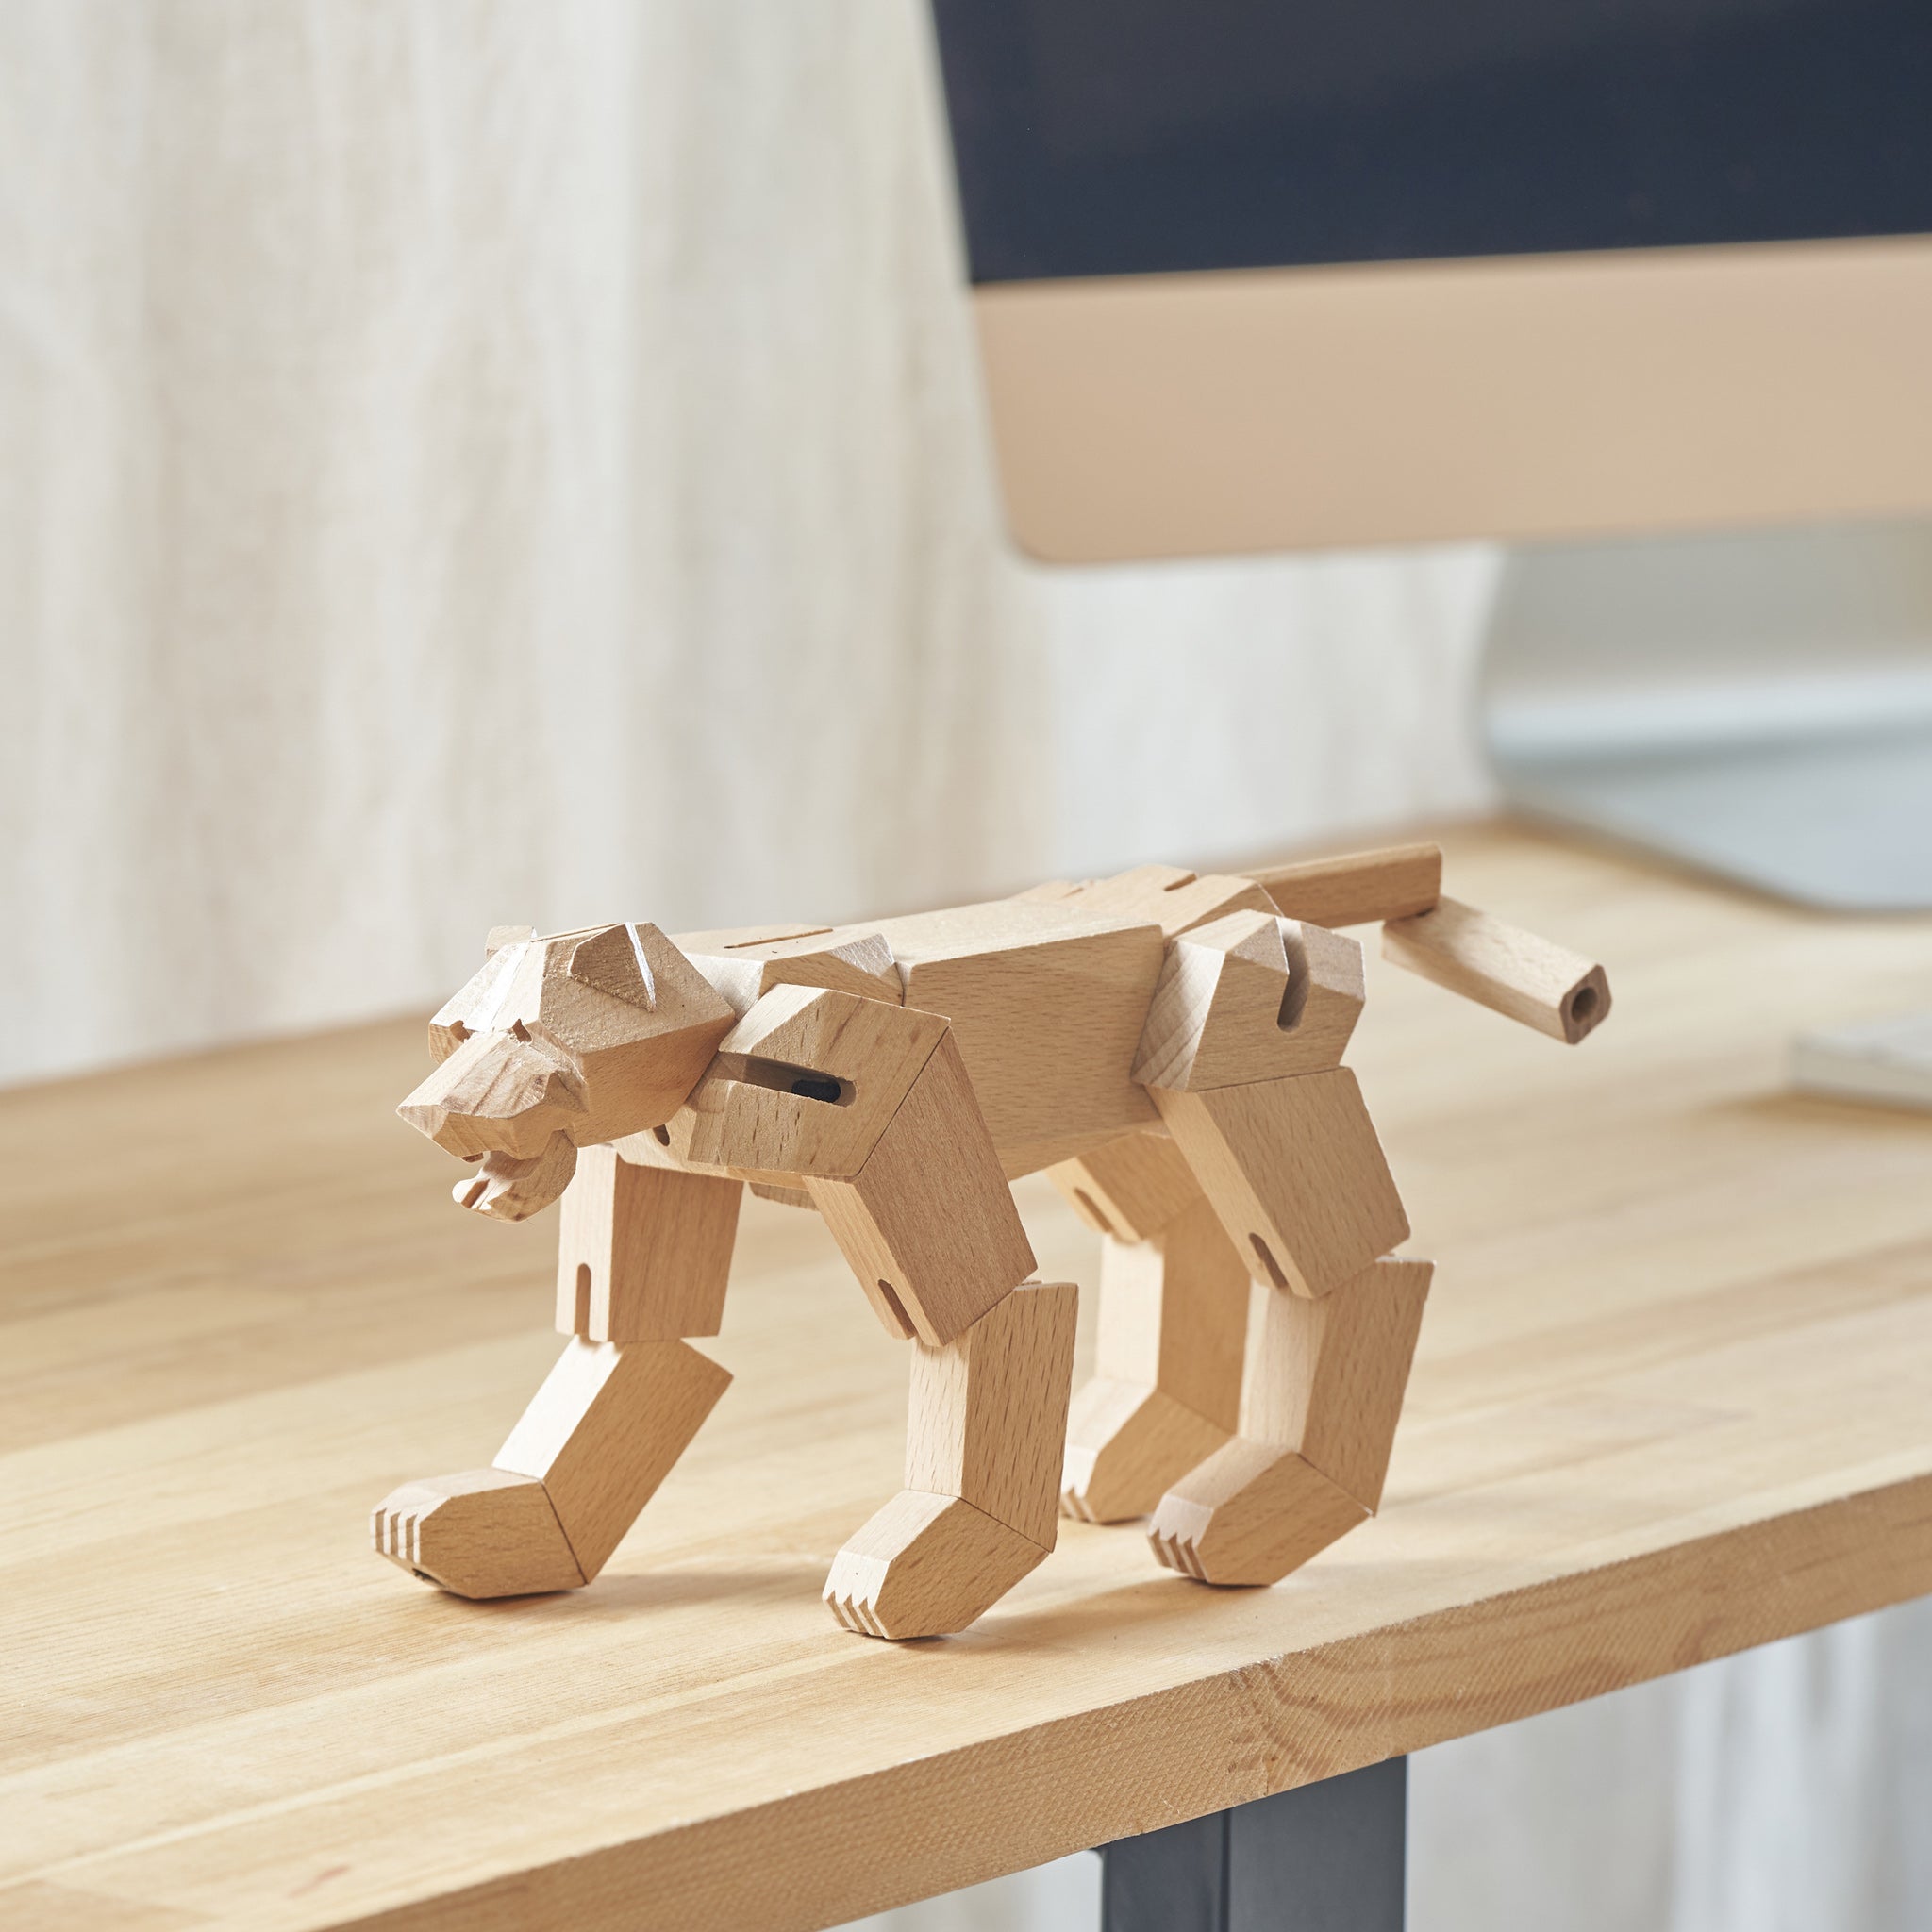 Morphits ® Tiger Wooden Toy: Roaring Adventures Await in our Wooden Playset - Yoshiaki Ito Design Stand N4